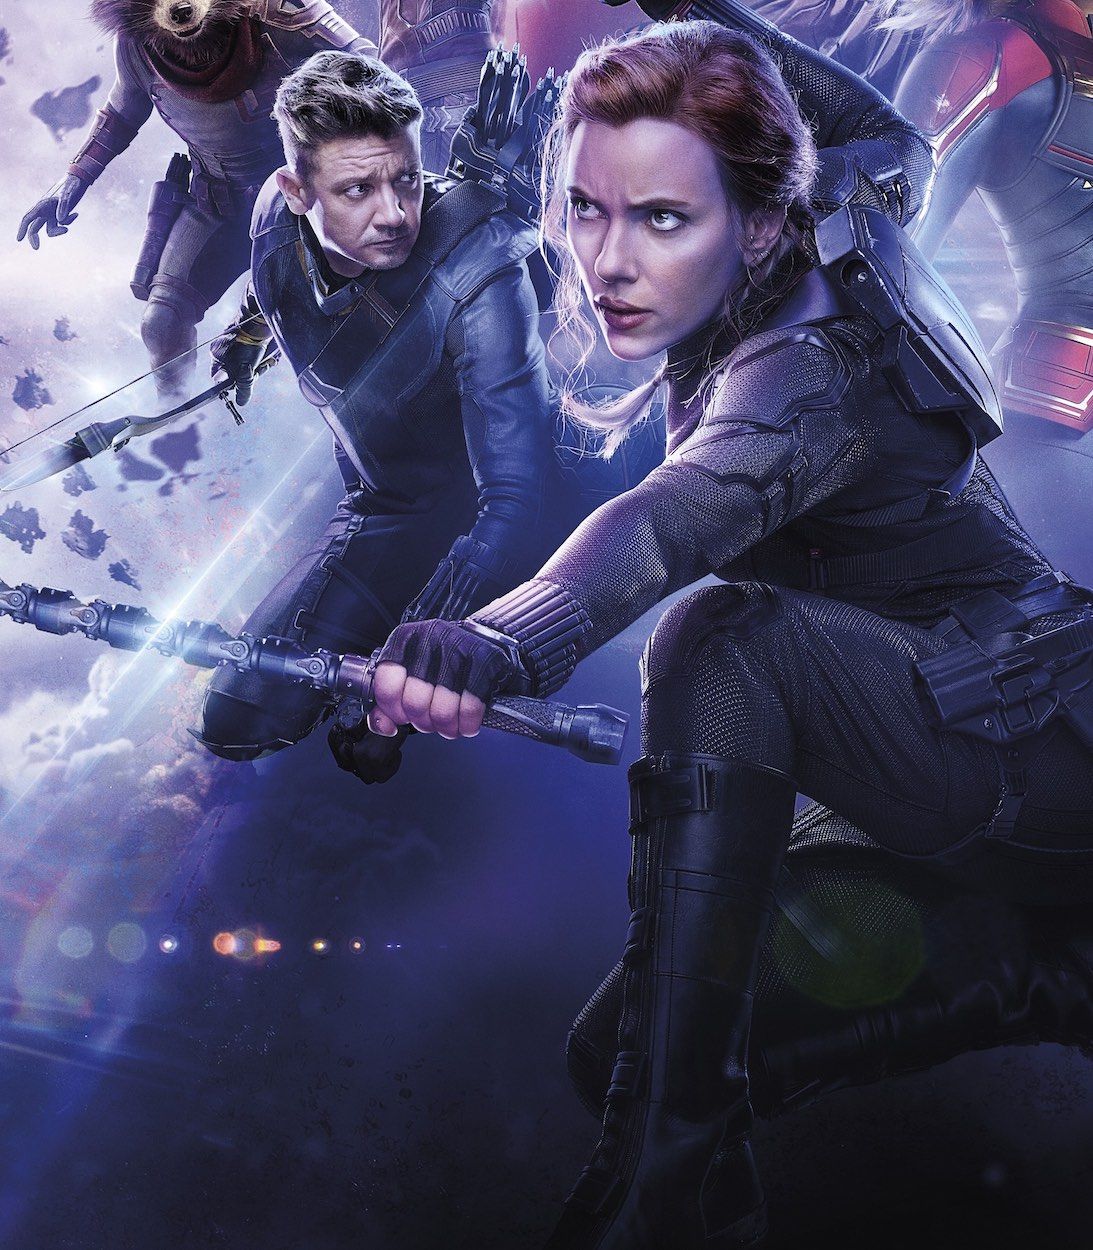 Black Widow and Hawkeye on the Avengers Endgame poster